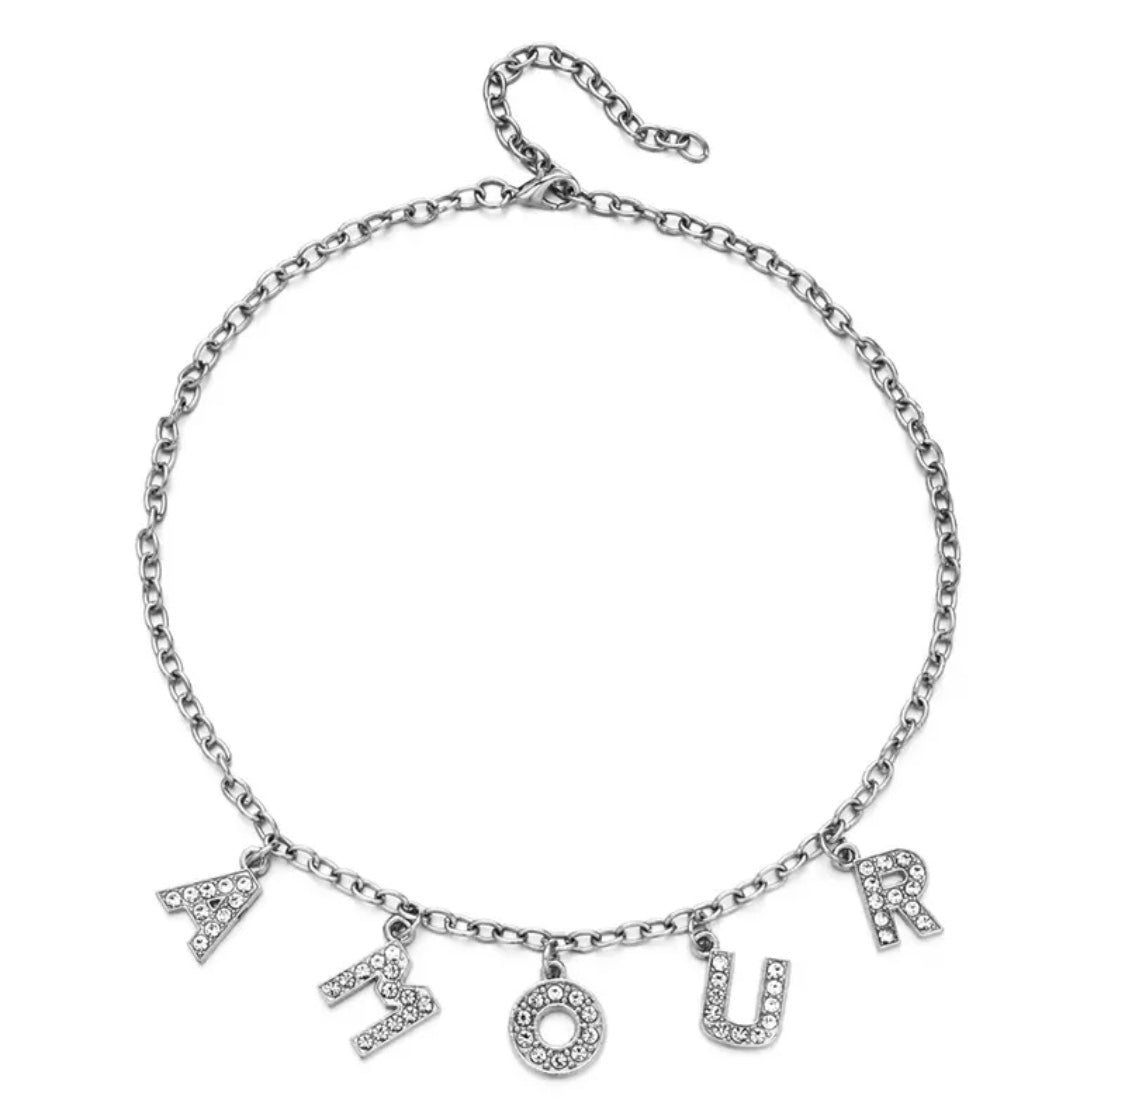 DDLGVERSE amour silver plated necklace